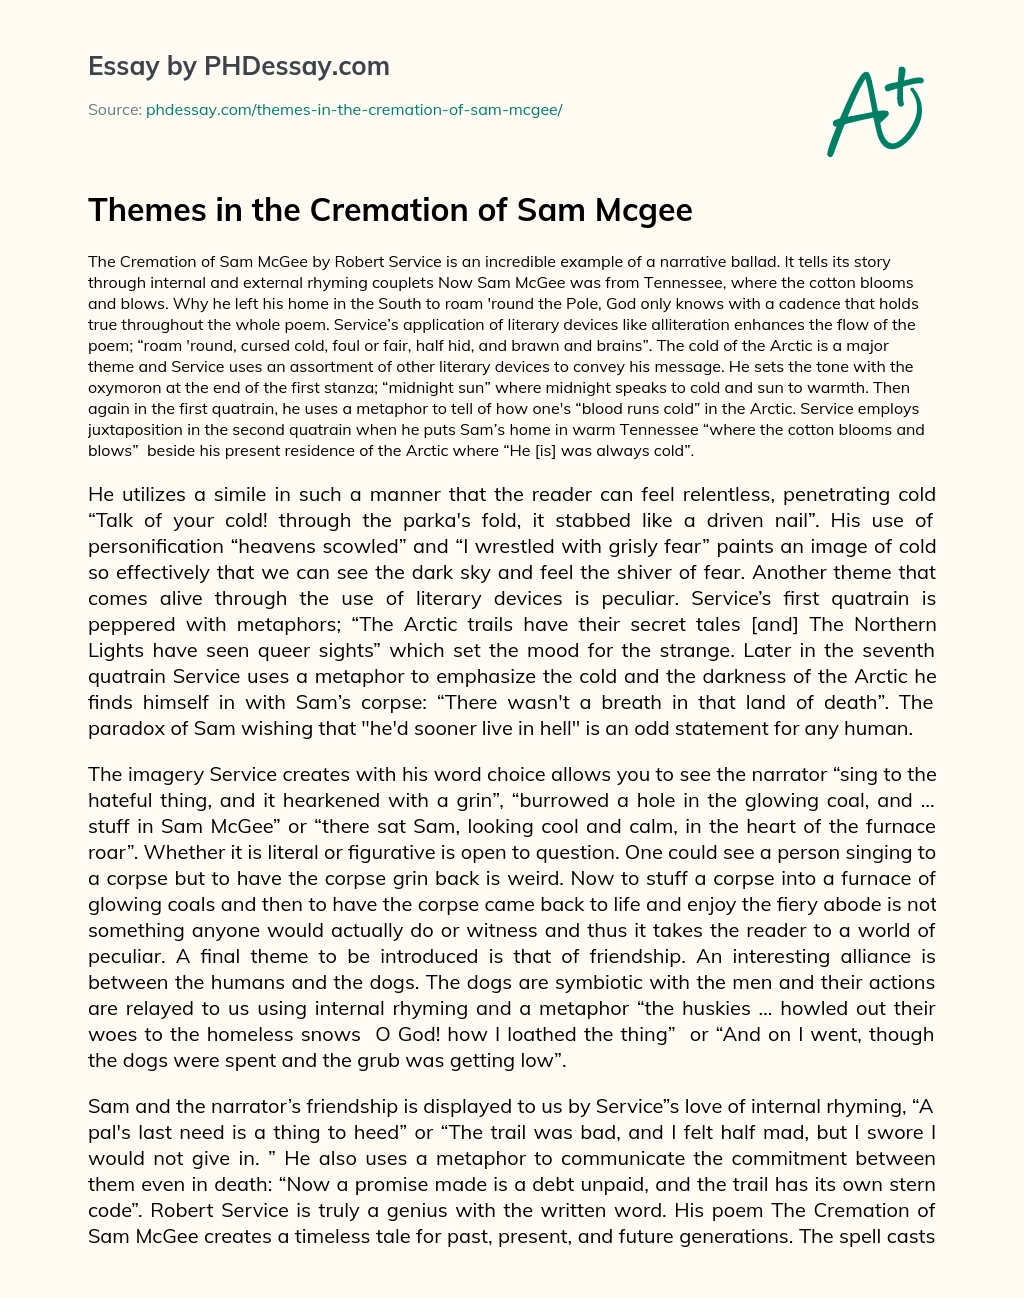 Themes in the Cremation of Sam Mcgee essay